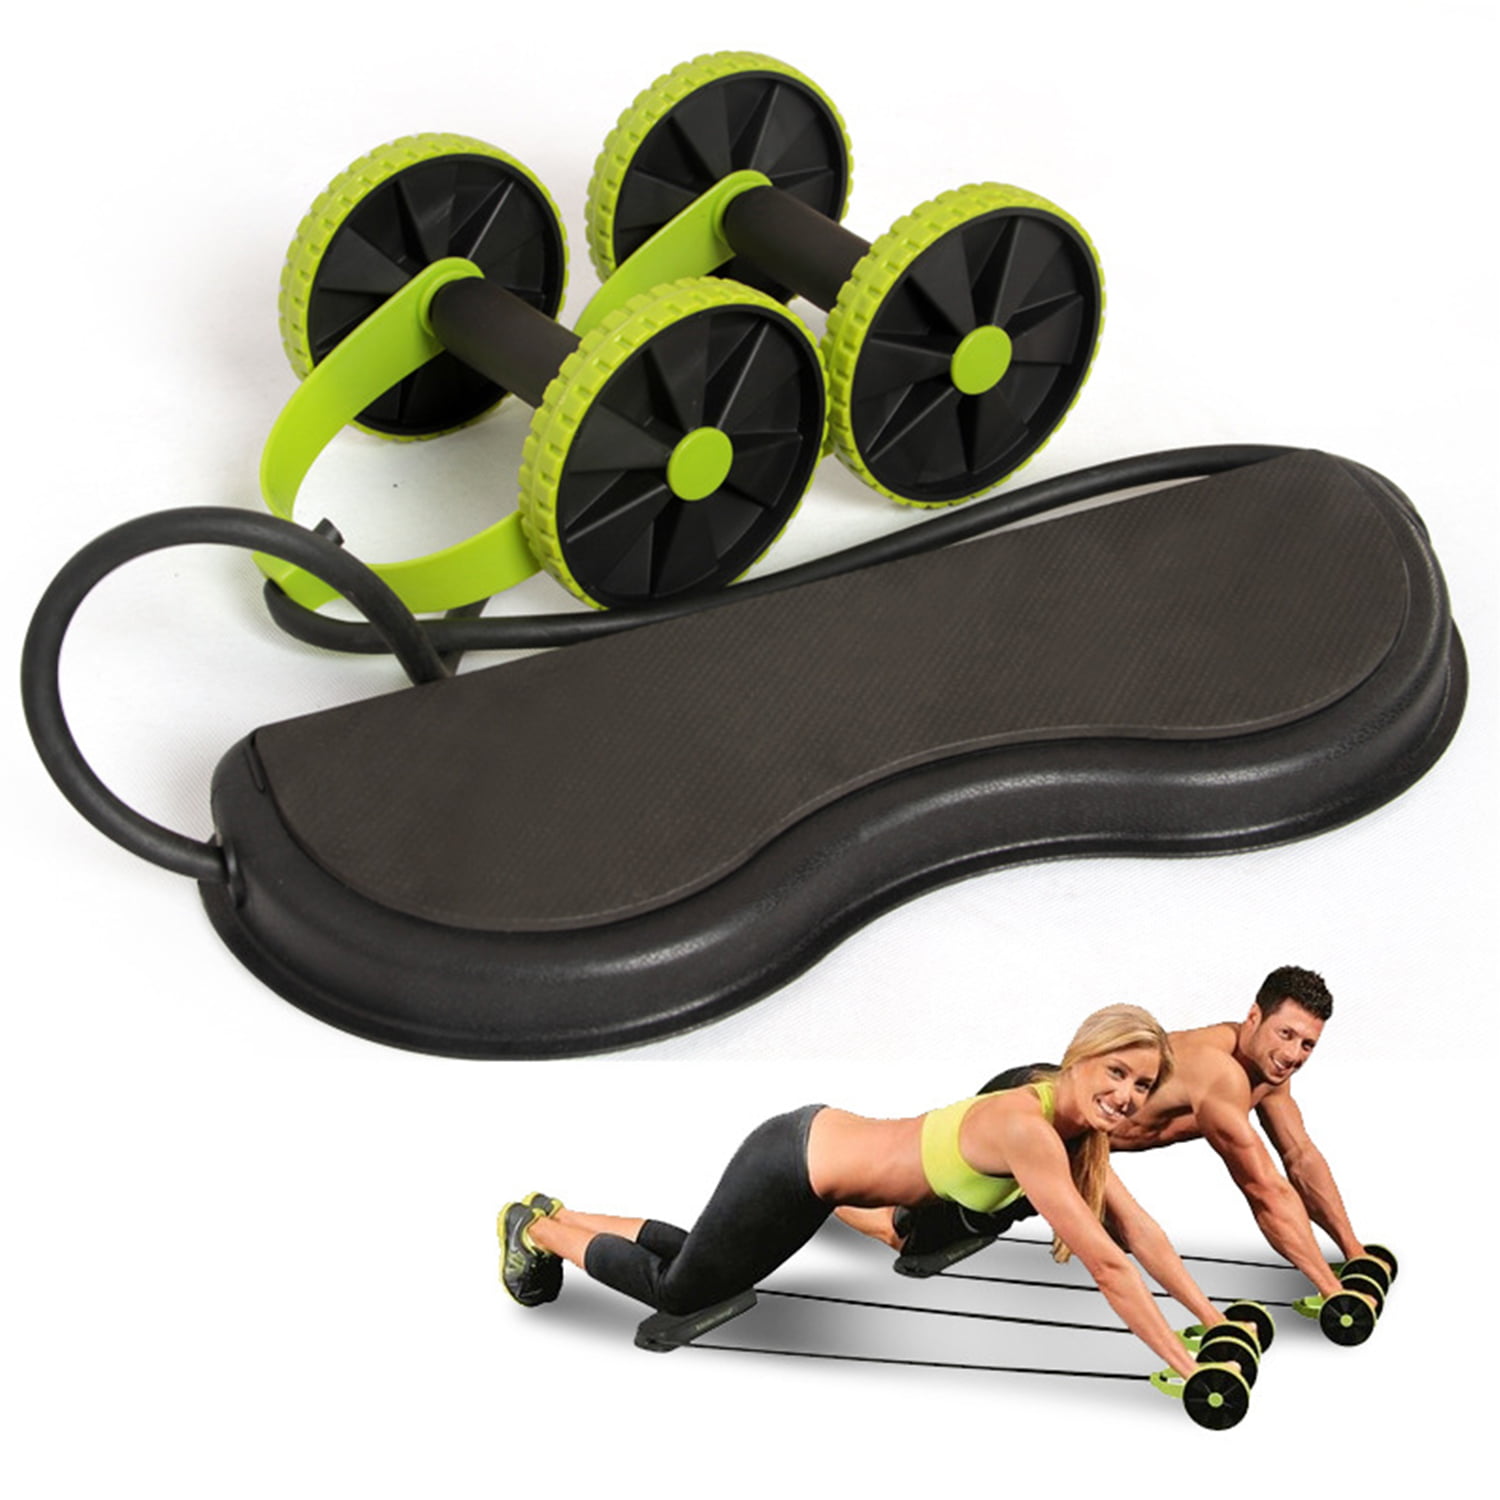 Abdominal Trainers AB Roller Multifunctional Exercise Equipment Ab Wheel Double Roller with Resistance Bands/Knee mat Waist Slimming Trainer at Home Gym